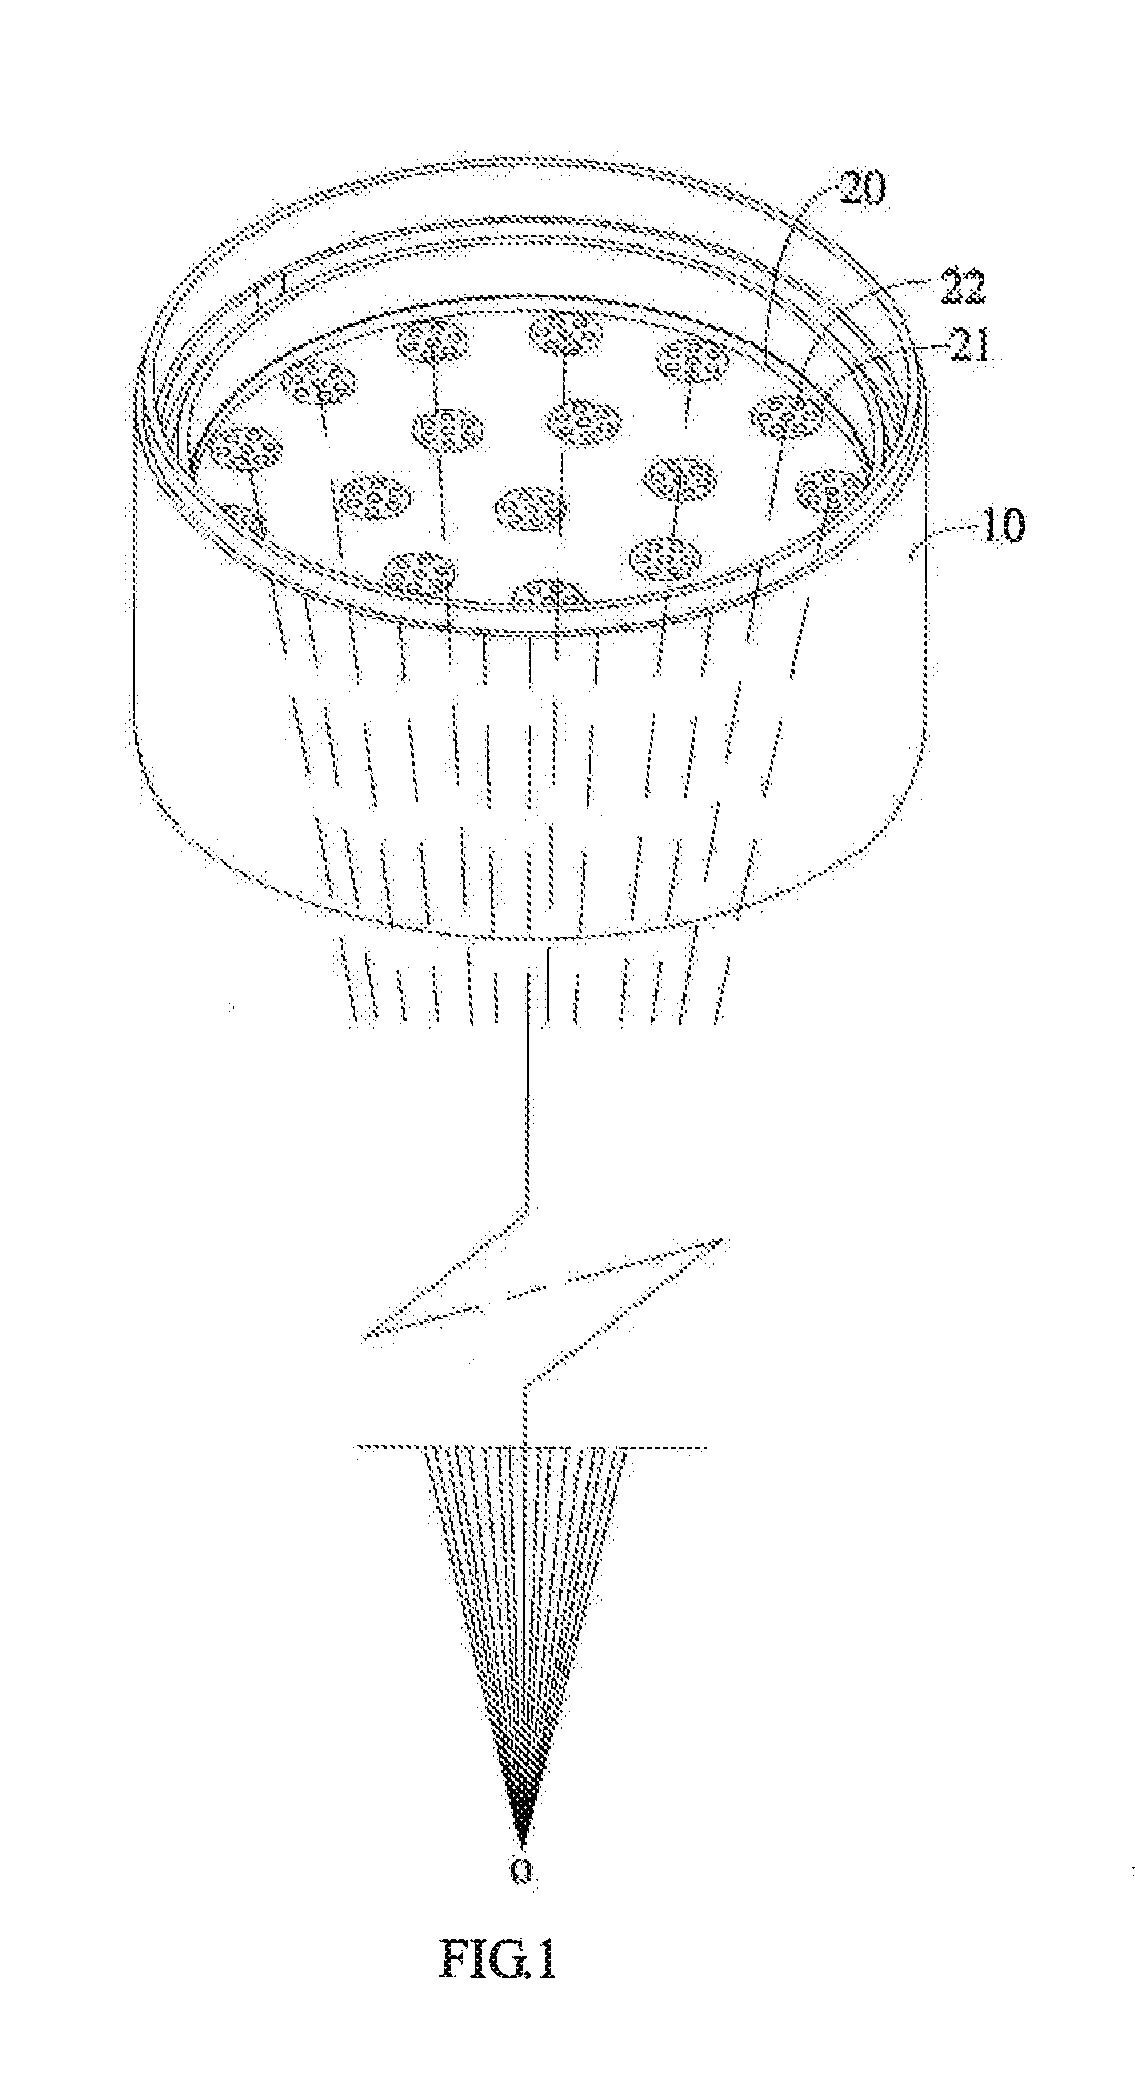 Self-focusing radioactive source device and radiating apparatus employing the same